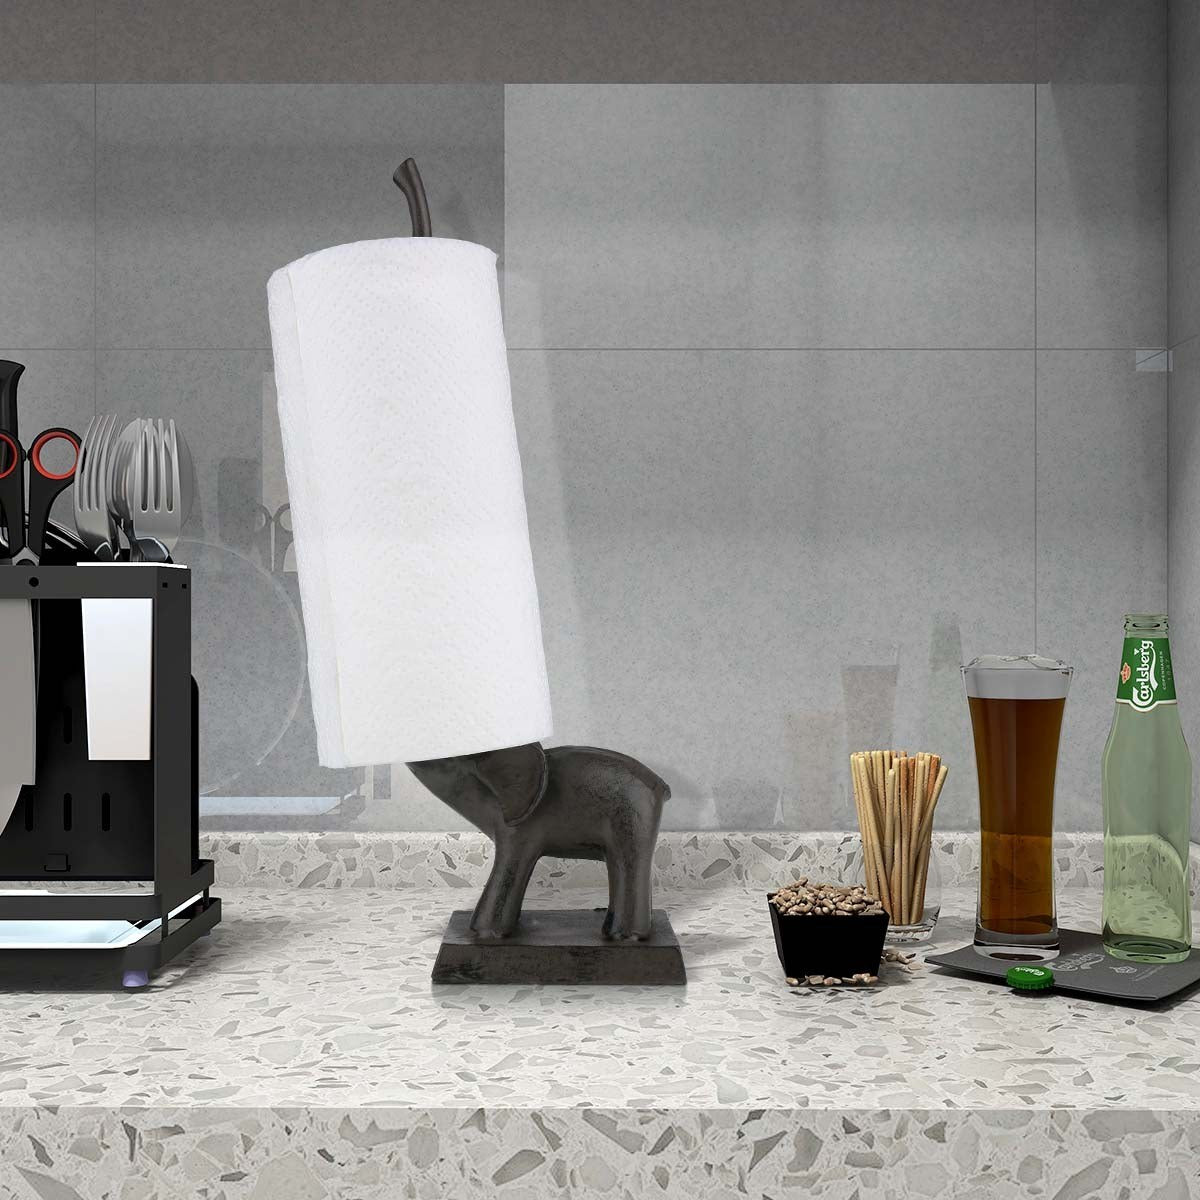 Elephant paper towel holder it funny in your kitchen countertop & decor!